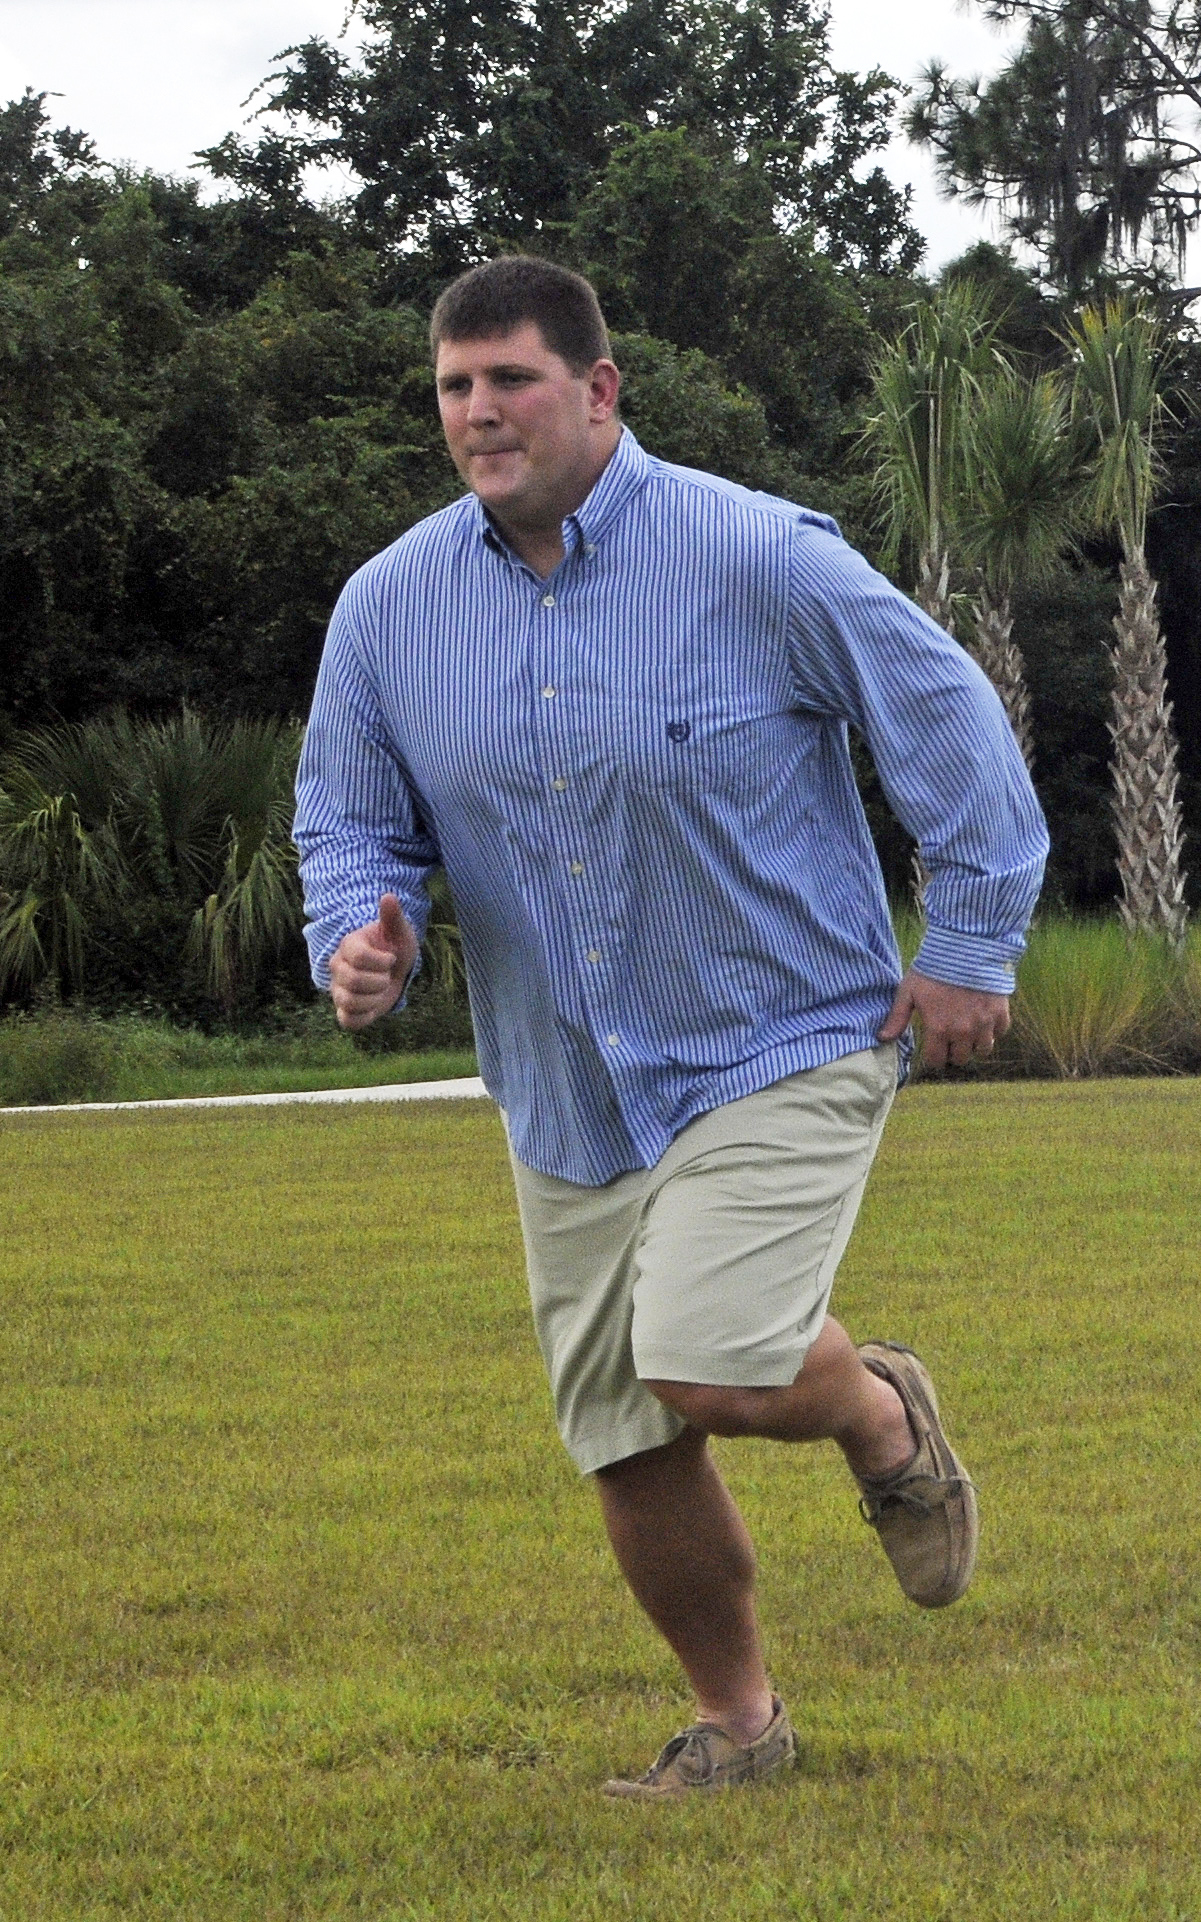 Chris McComas, seen running to track down a kickball, is  working with Lakewood Ranch to bring more sports facilities to the area. File photo.